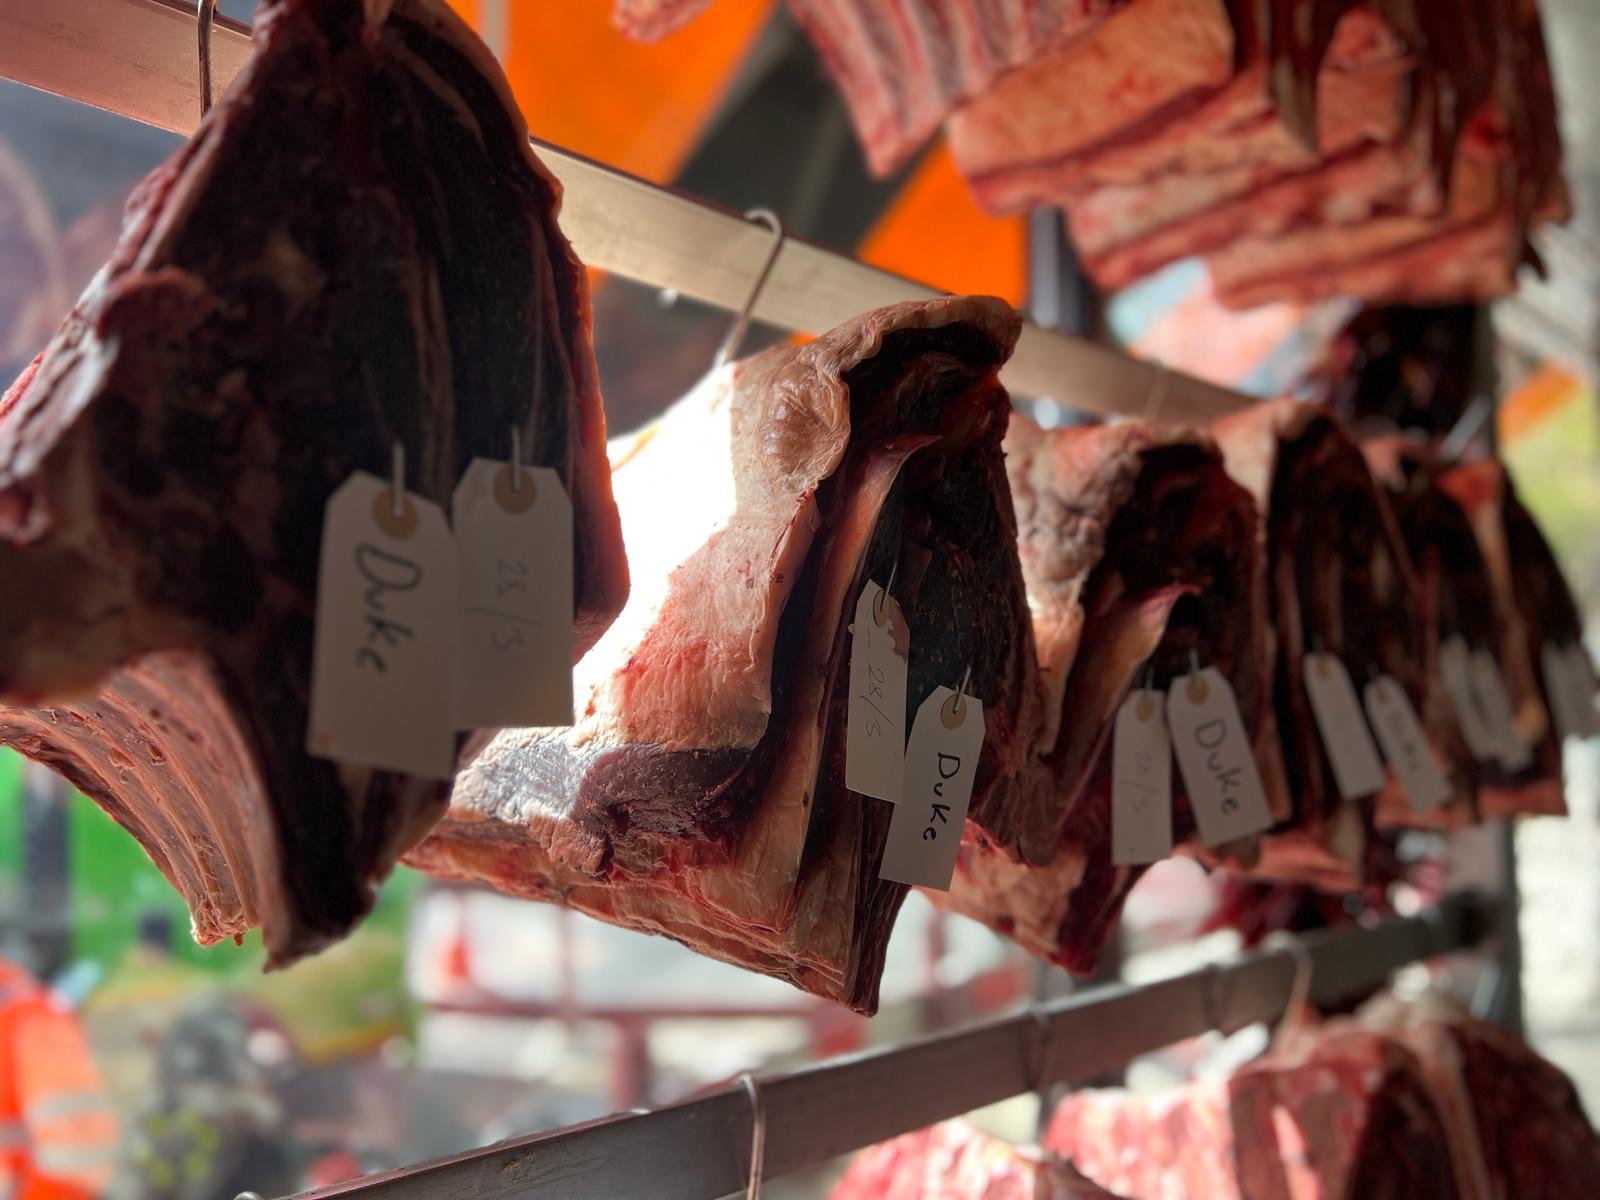 A Butchery Demonstration in Celebration of The Great British Beef